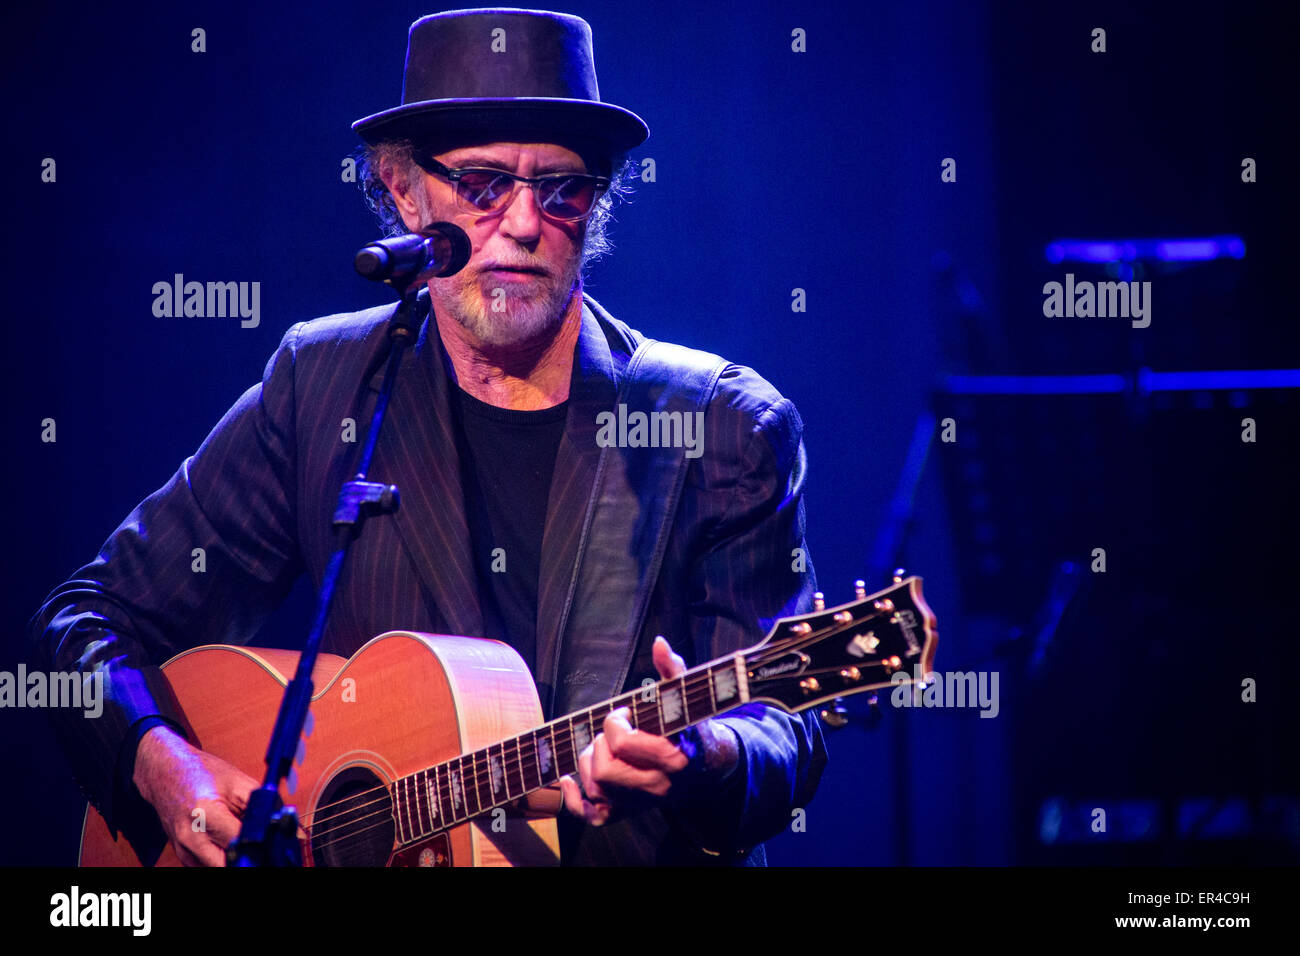 Varese Italy. 26 May 2015. The Italian singer/songwriter FRANCESCO DE GREGORI performs live at Teatro di Varese during the 'Vivavoce Tour' Stock Photo